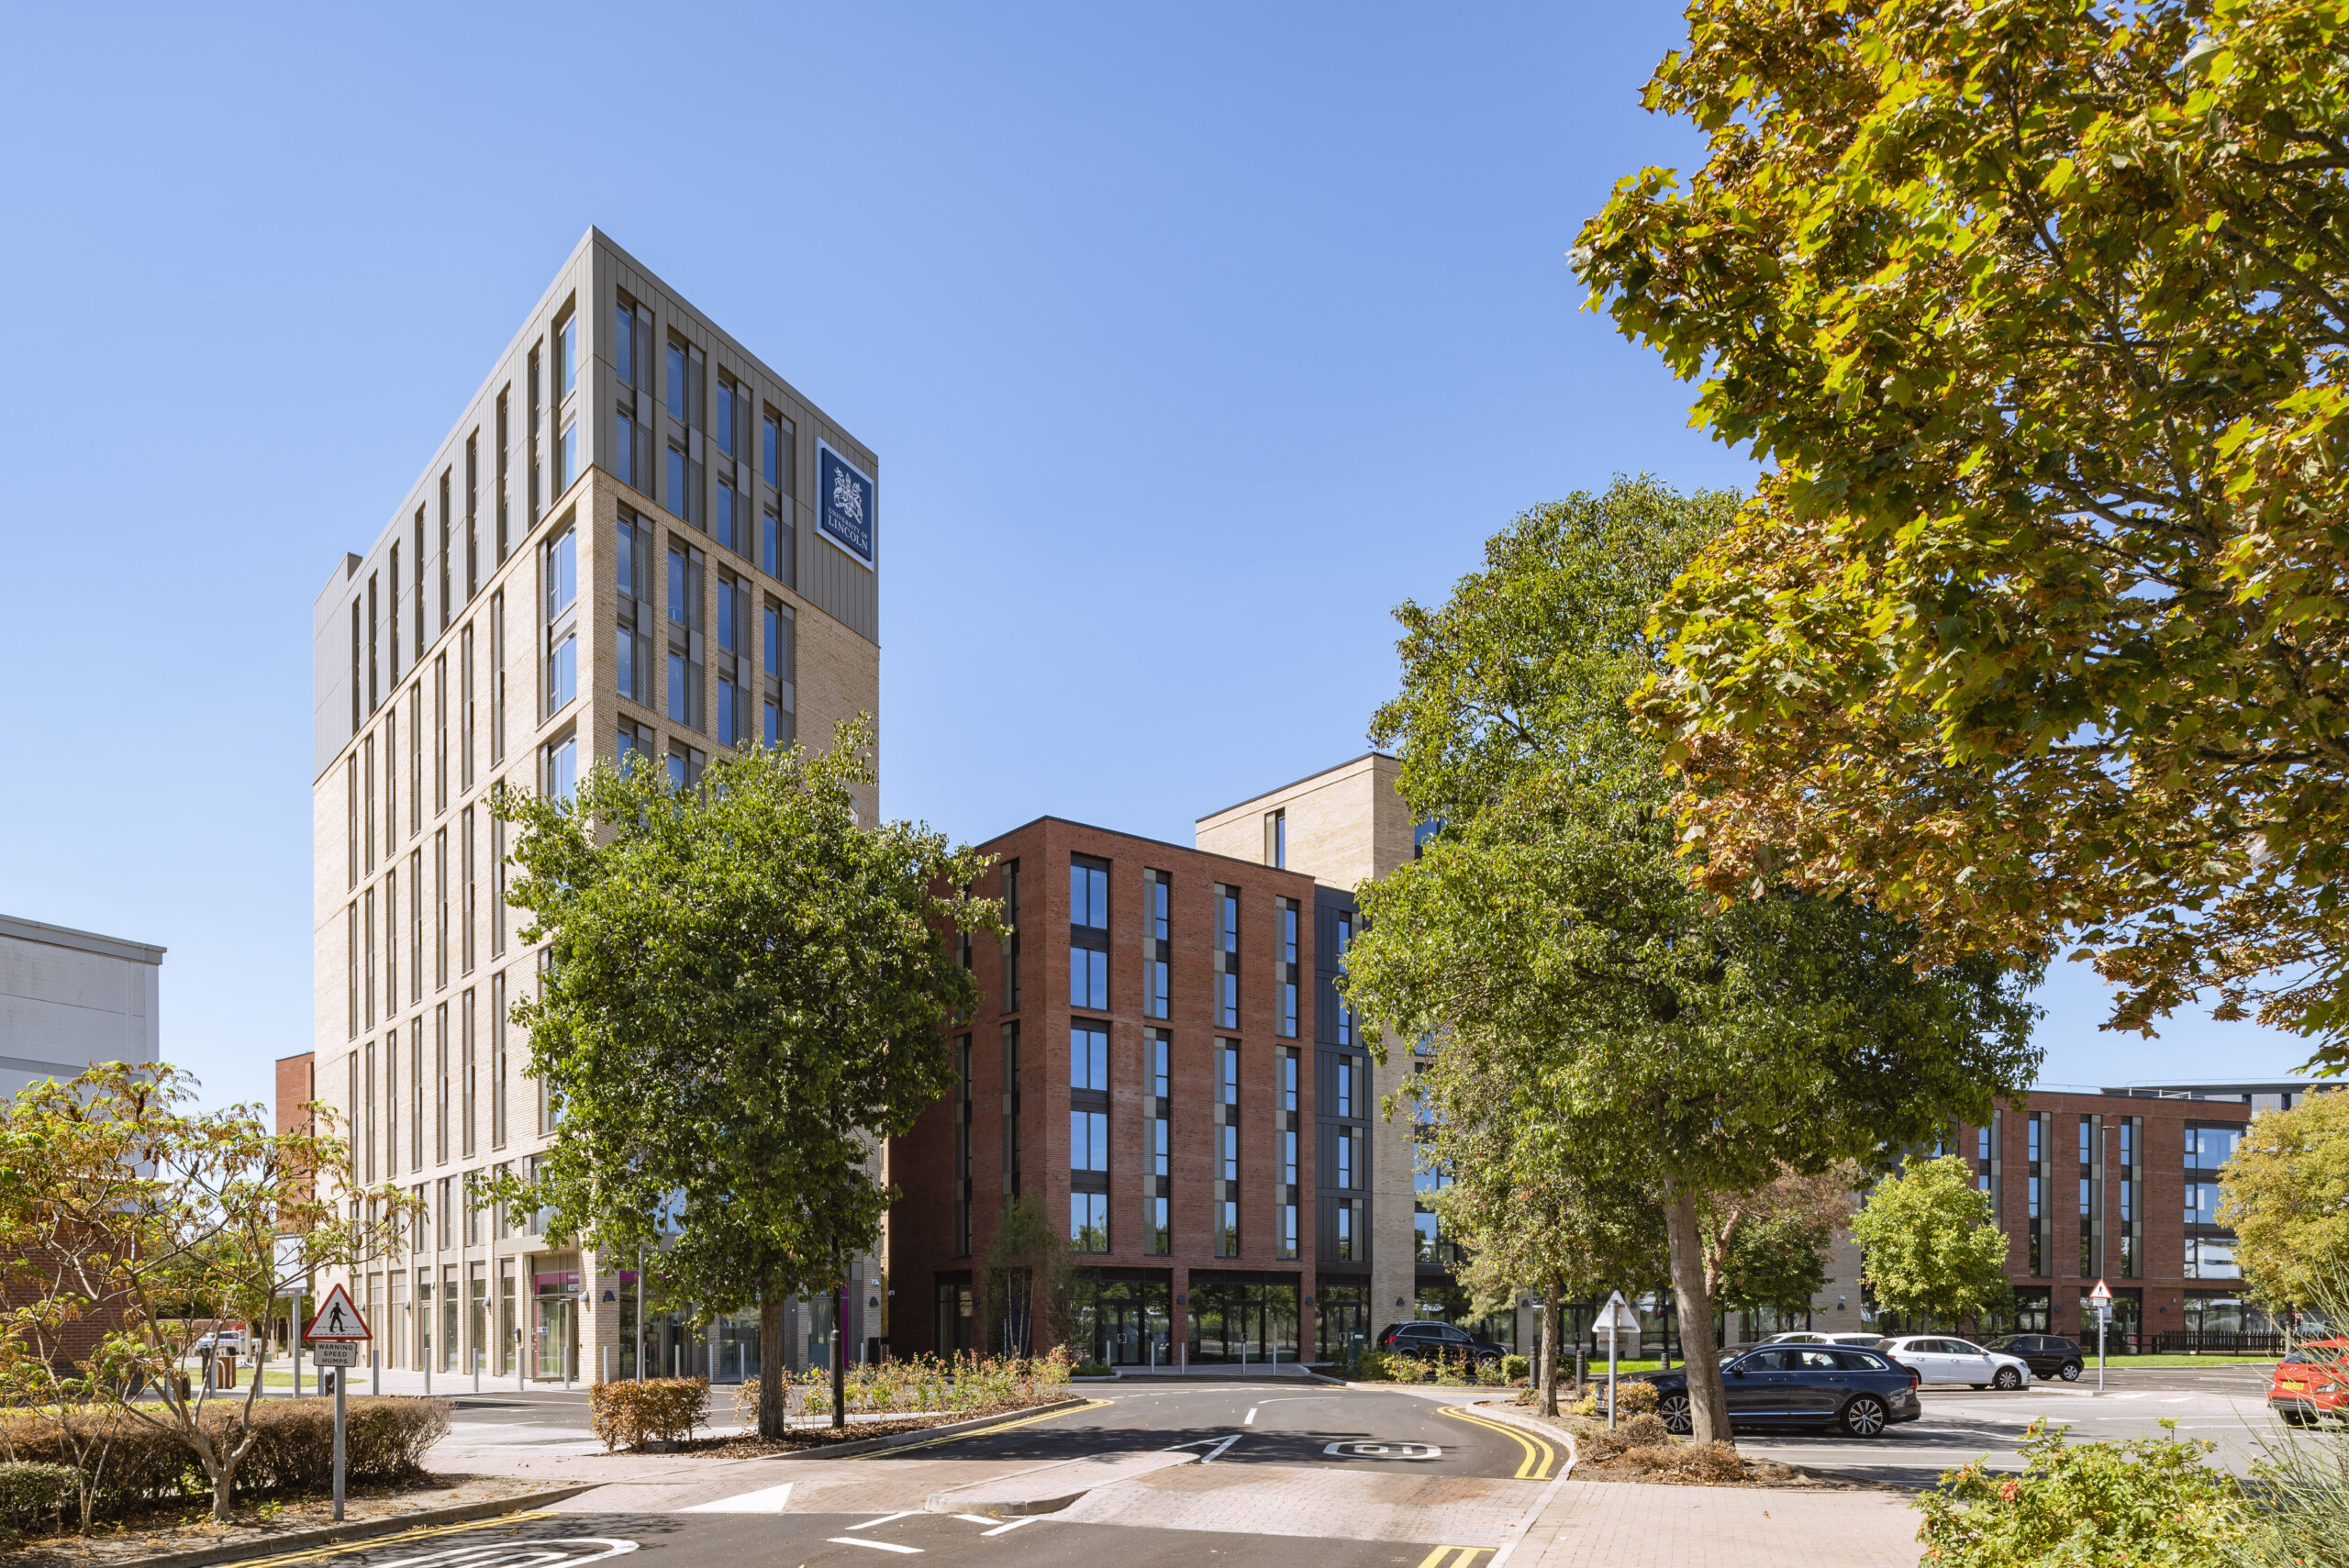 Project photo of Lincoln St. Marks new student accommodation buildings alongside an avenue of trees